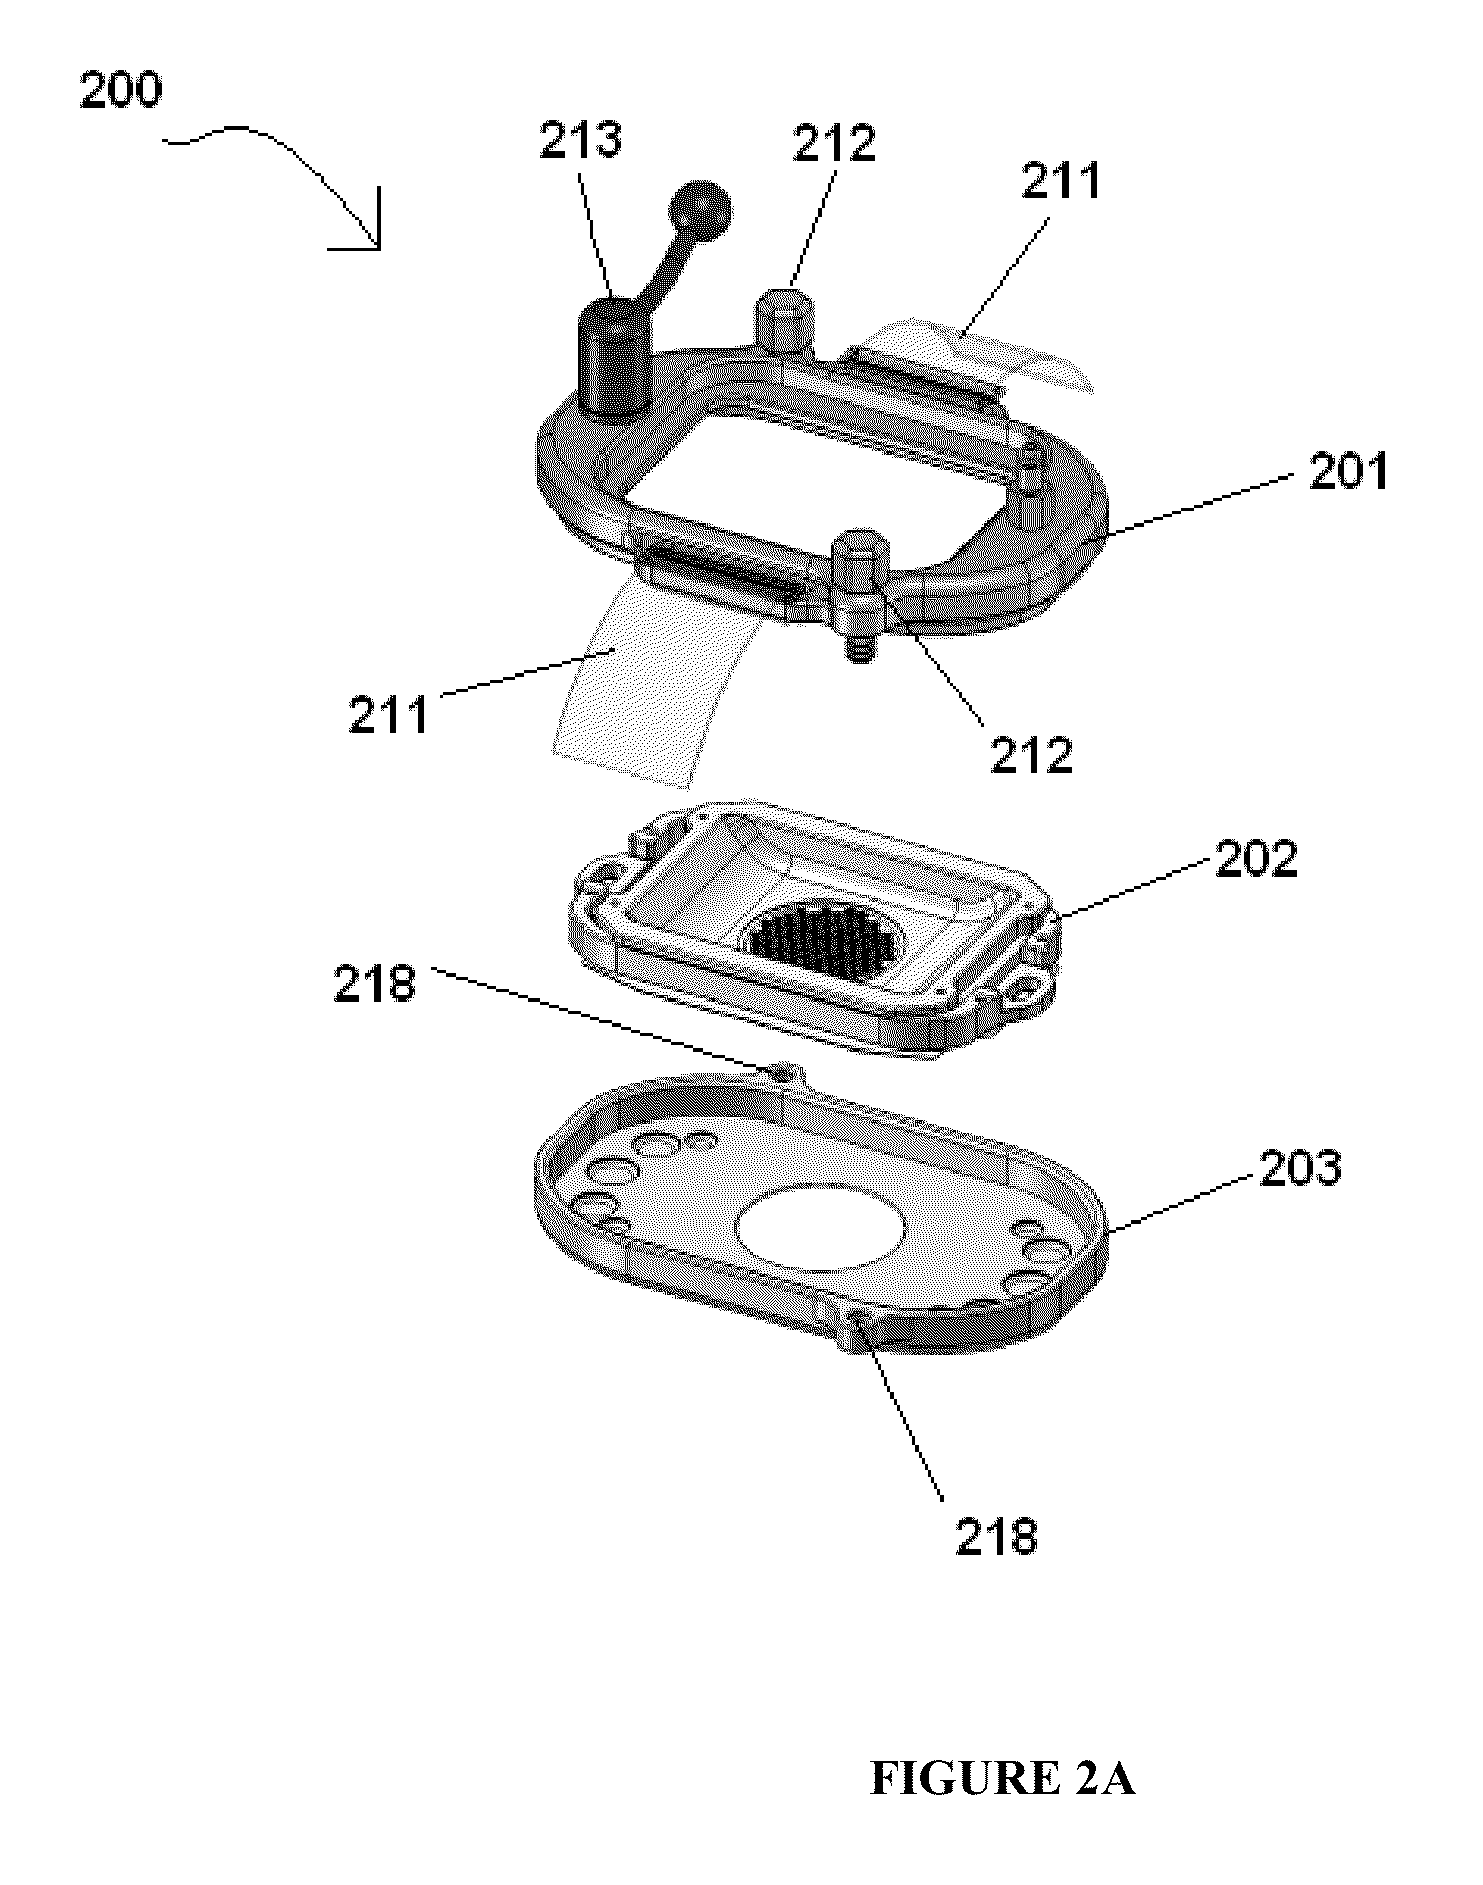 Methods of manufacturing devices for generating skin grafts